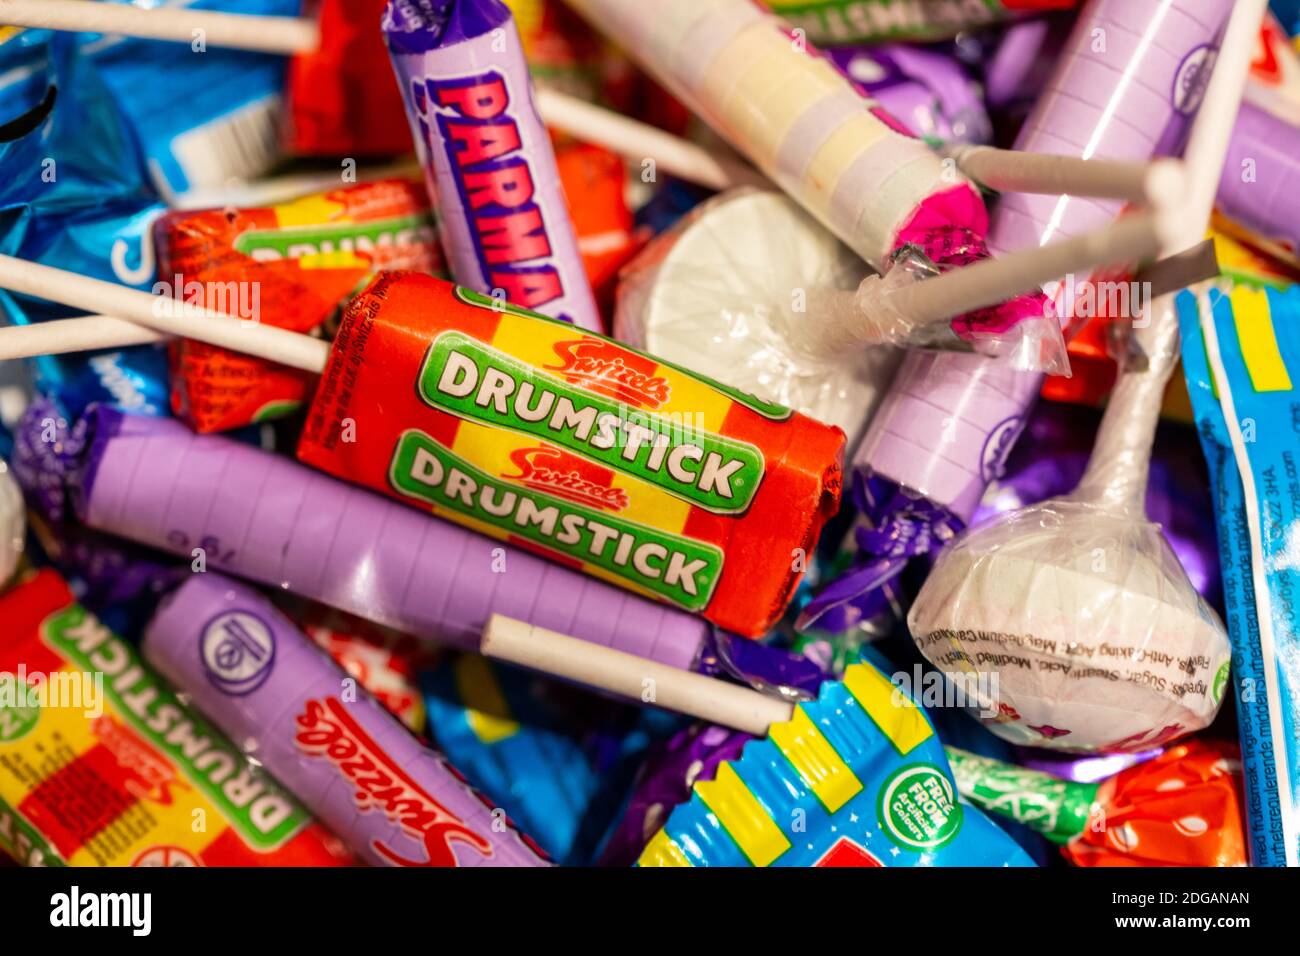 08/12/2020 Portsmouth, Hampshire, UK A selection of retro sweets close up with the focus on a drumstick lolly Stock Photo